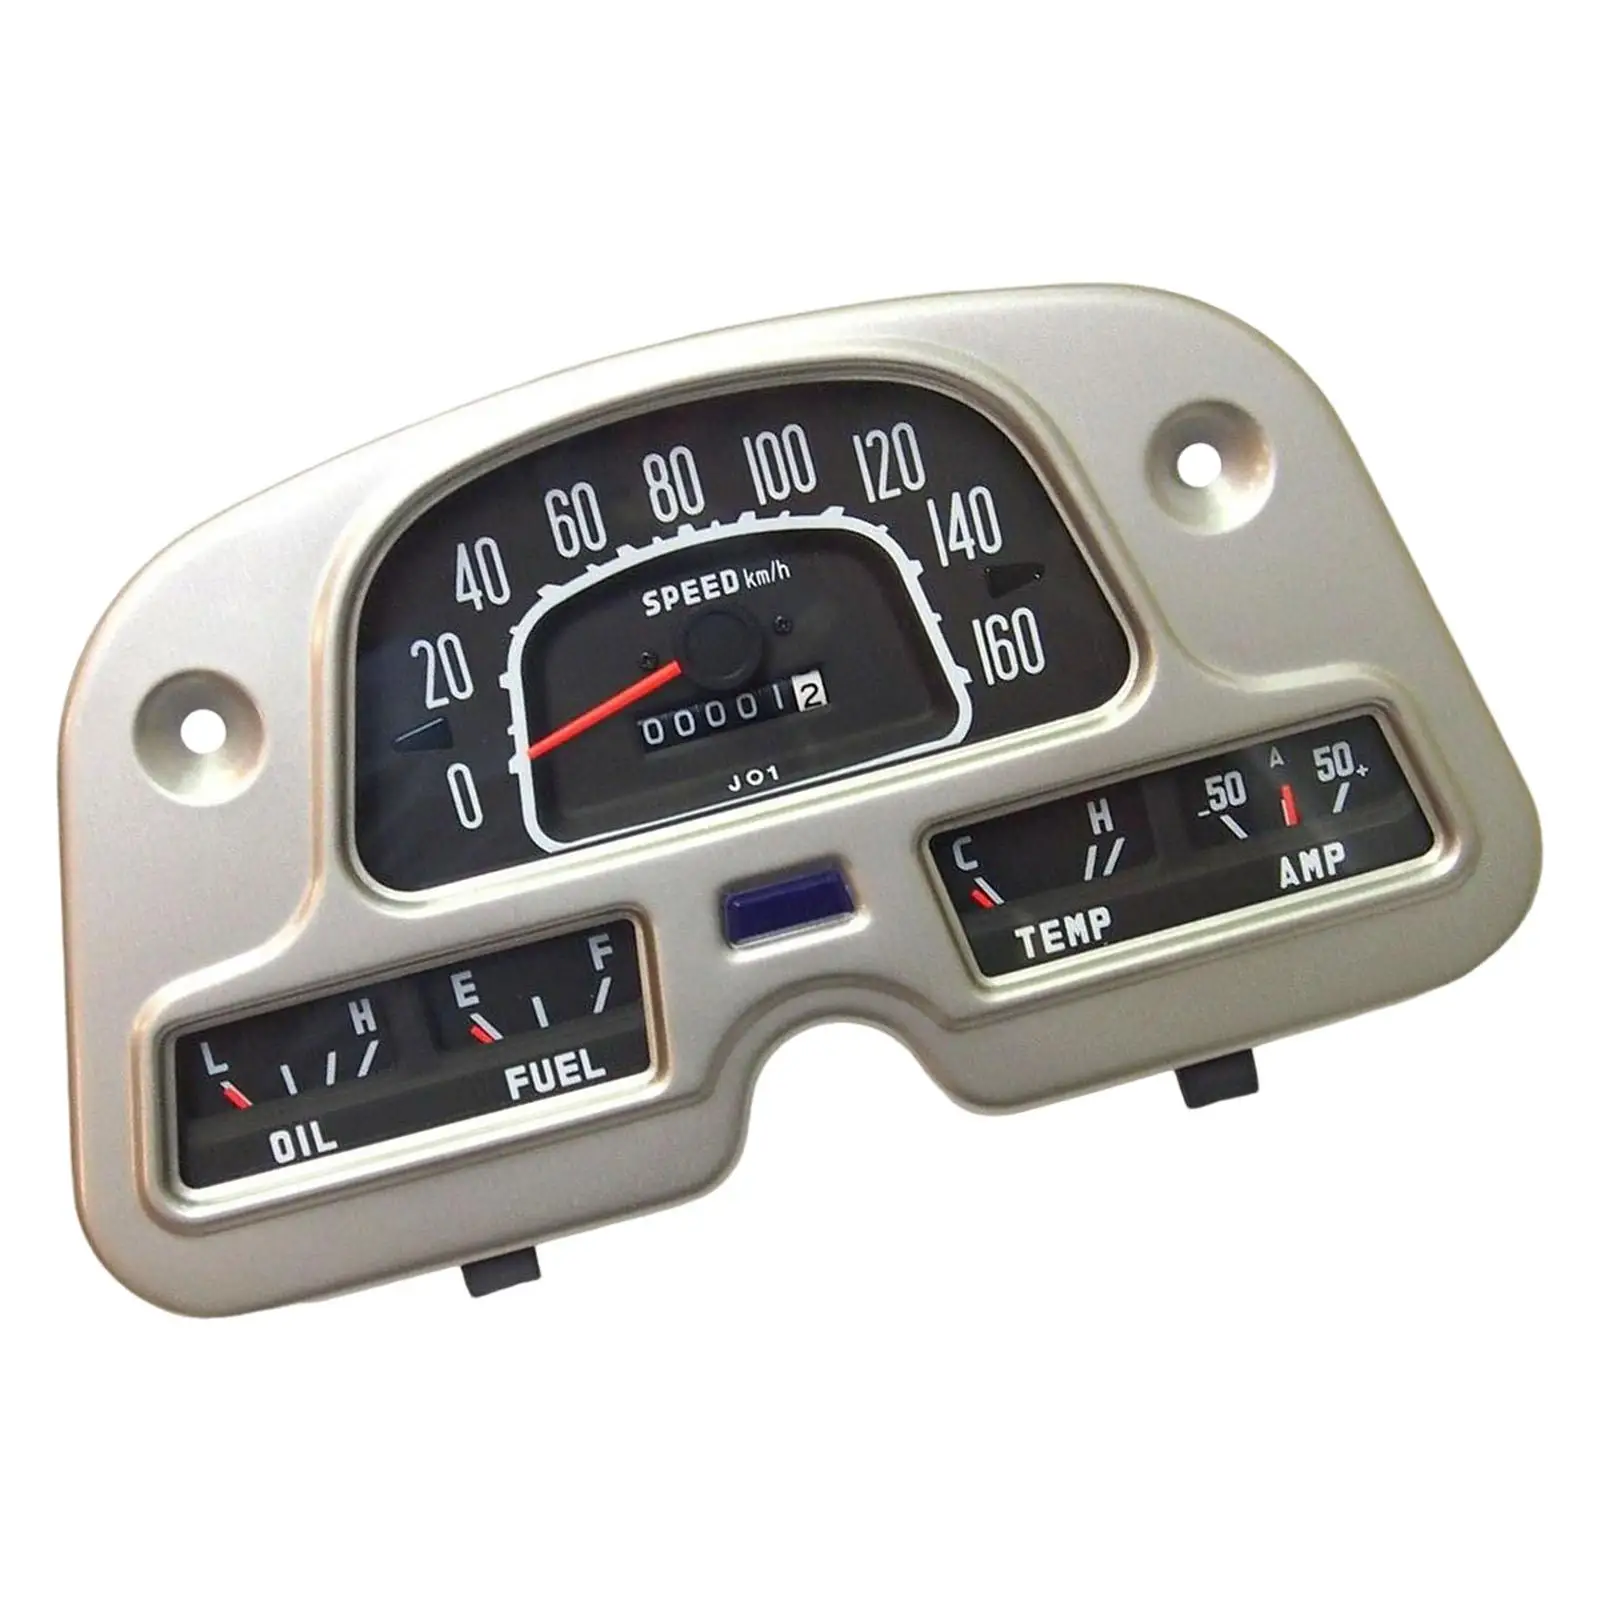 83100-60180 Speedometer Cluster for Bj40 Automobile Replaces Accessories